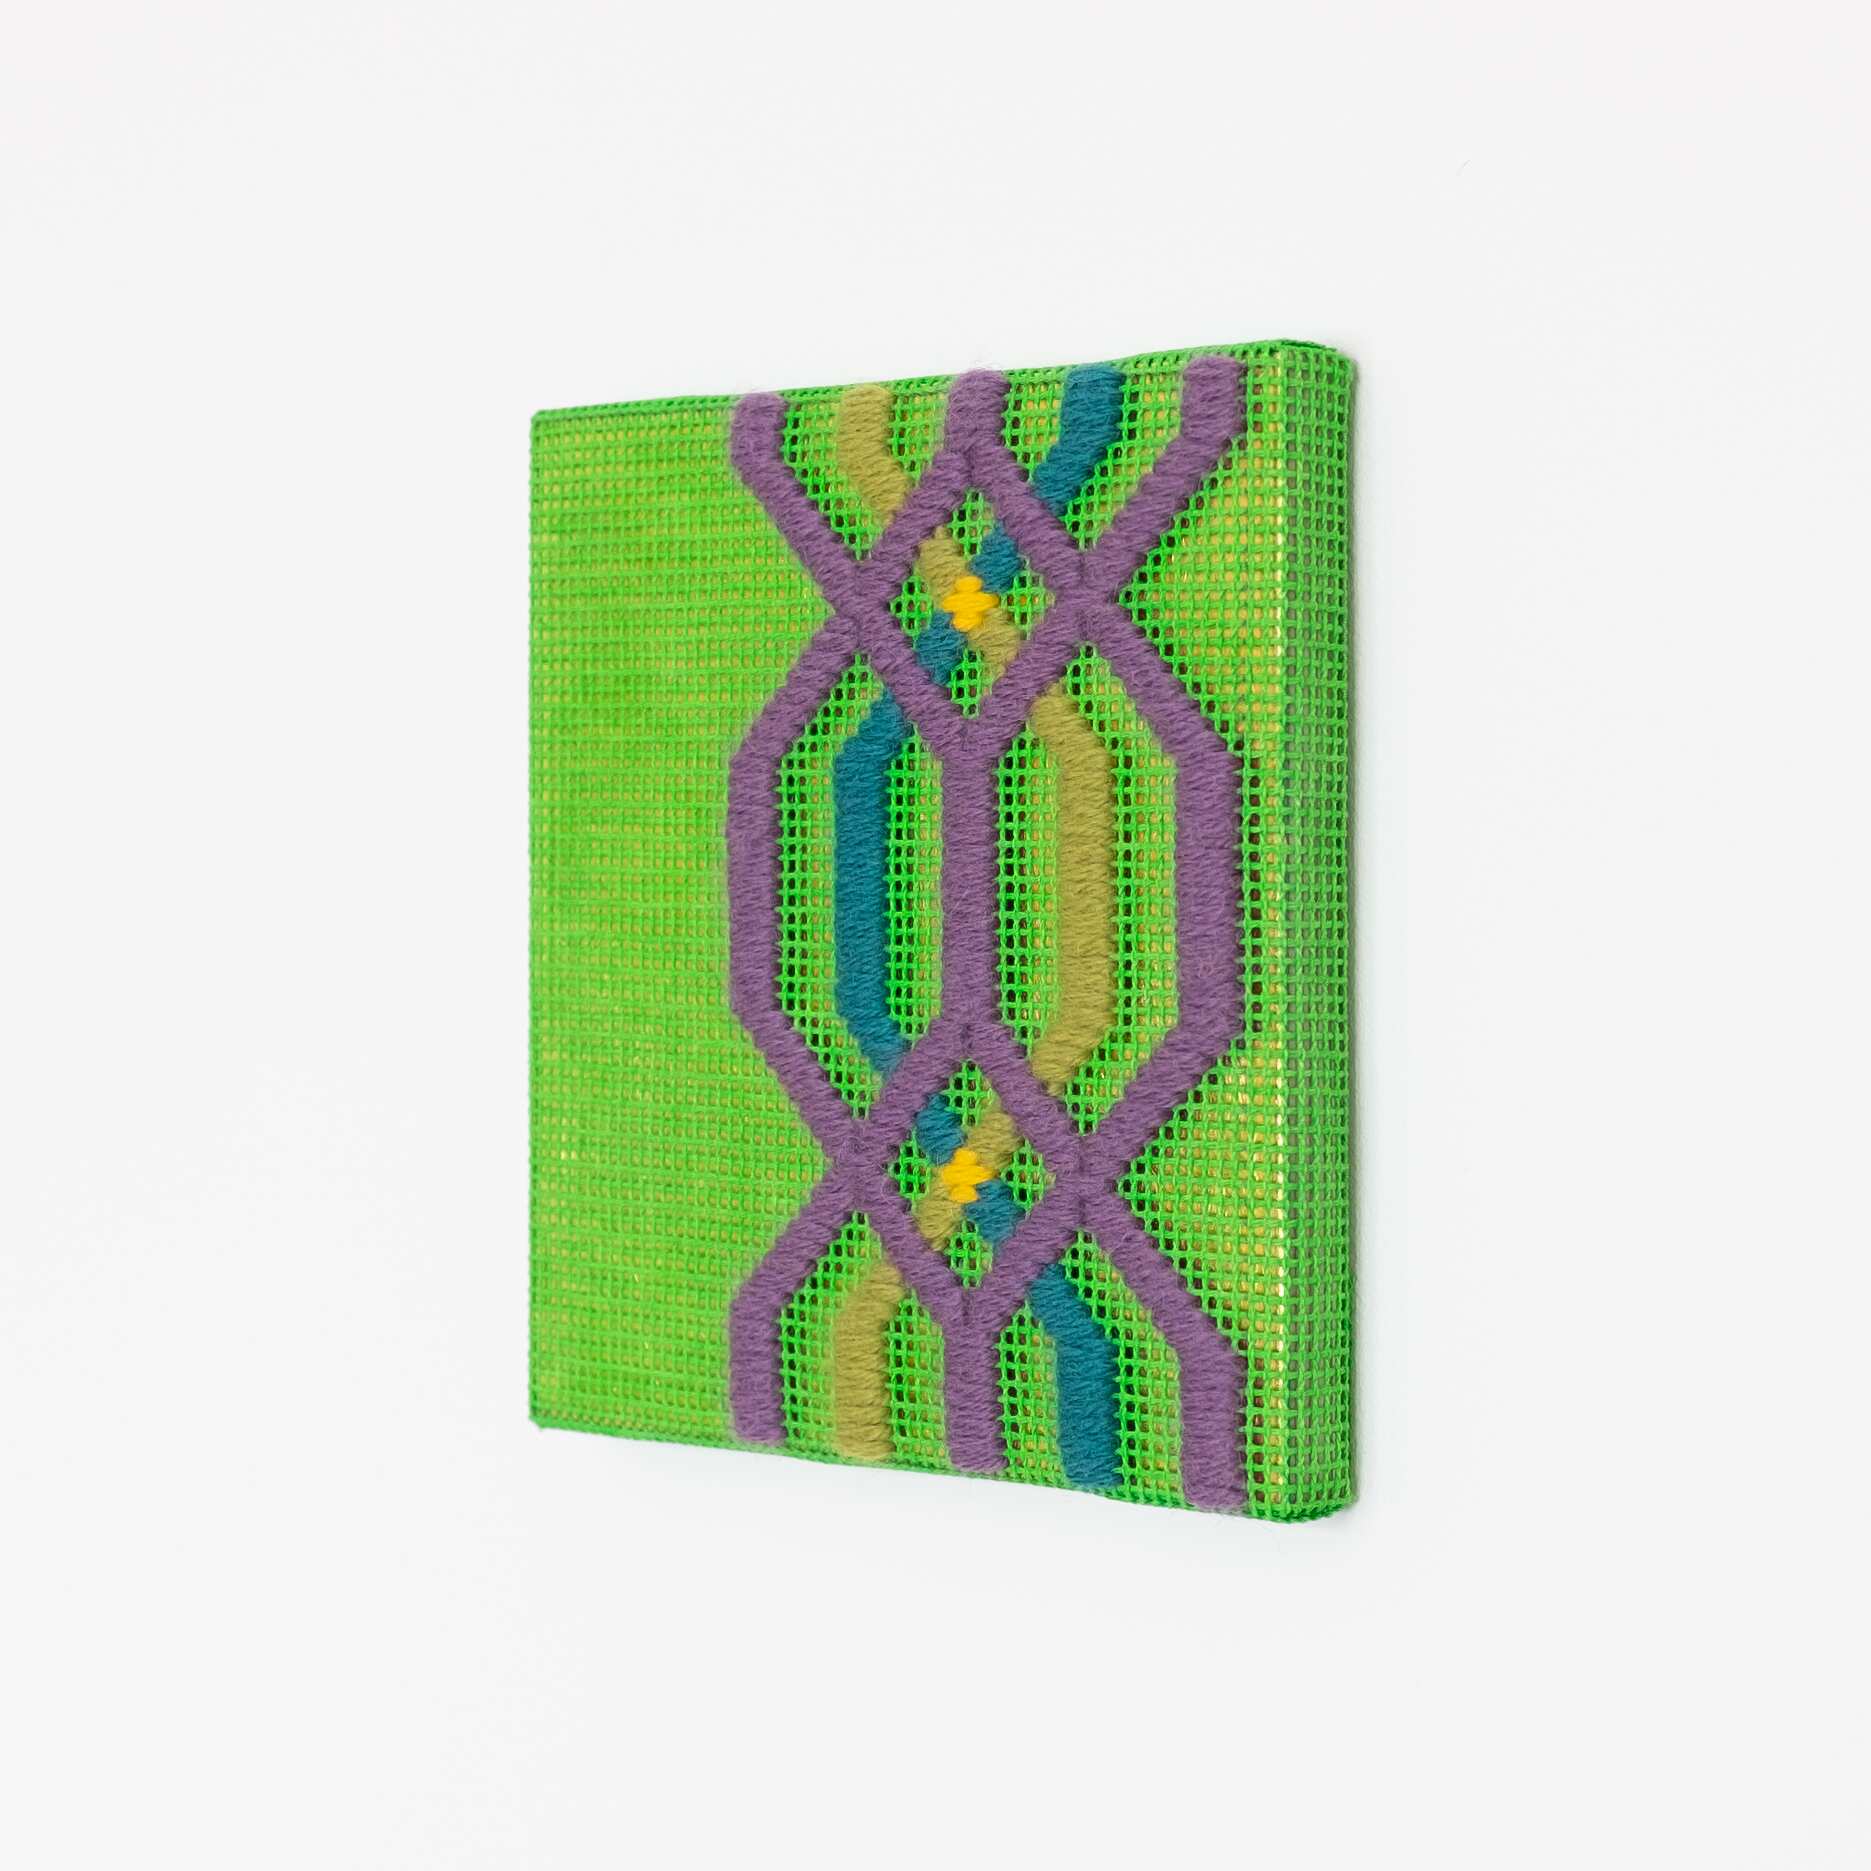 Border fragment [purple-teal-green on green], Hand-embroidered wool thread and acrylic paint on canvas over gilded panel, 2021